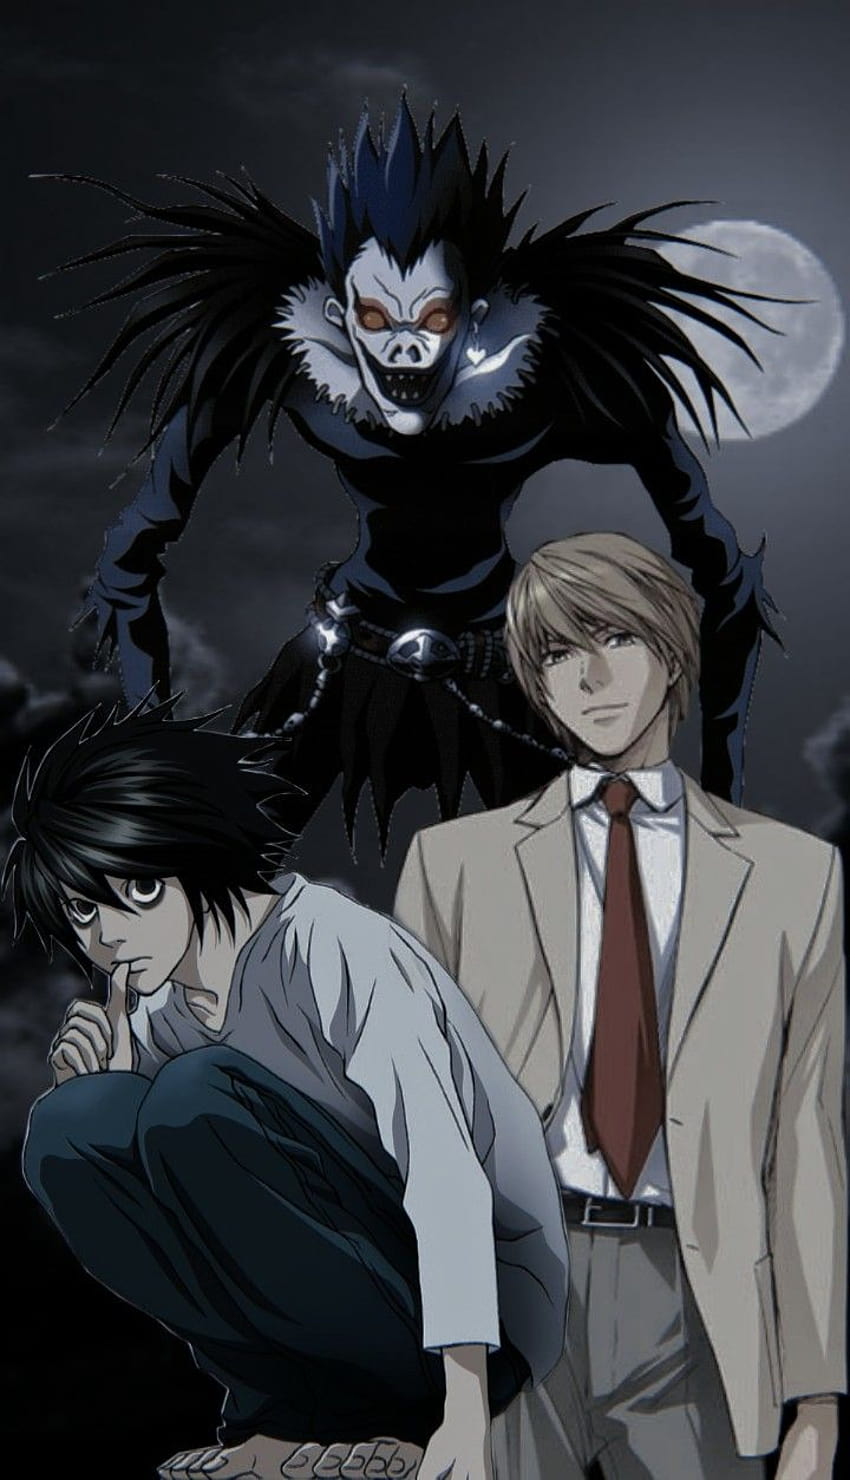 A group of people with masks on their faces - Death Note